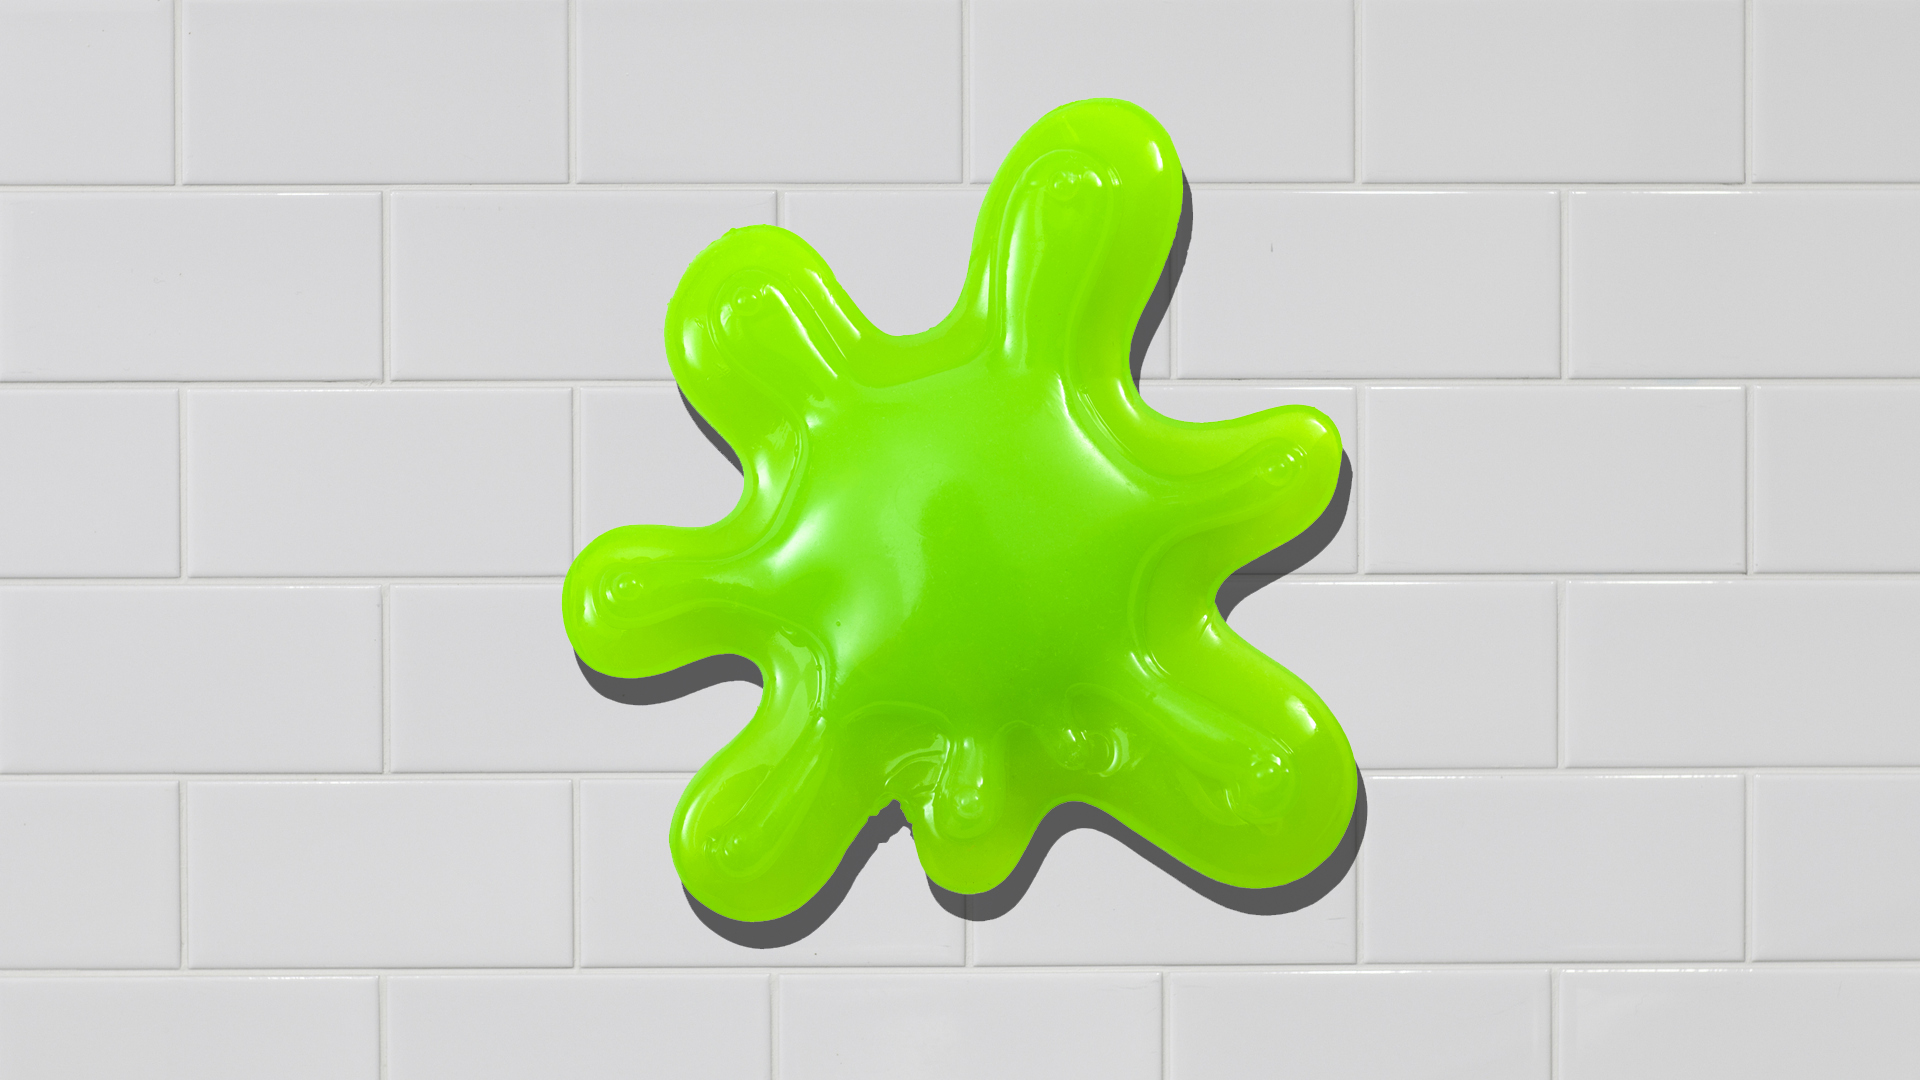 A blob of slime on a kitchen wall